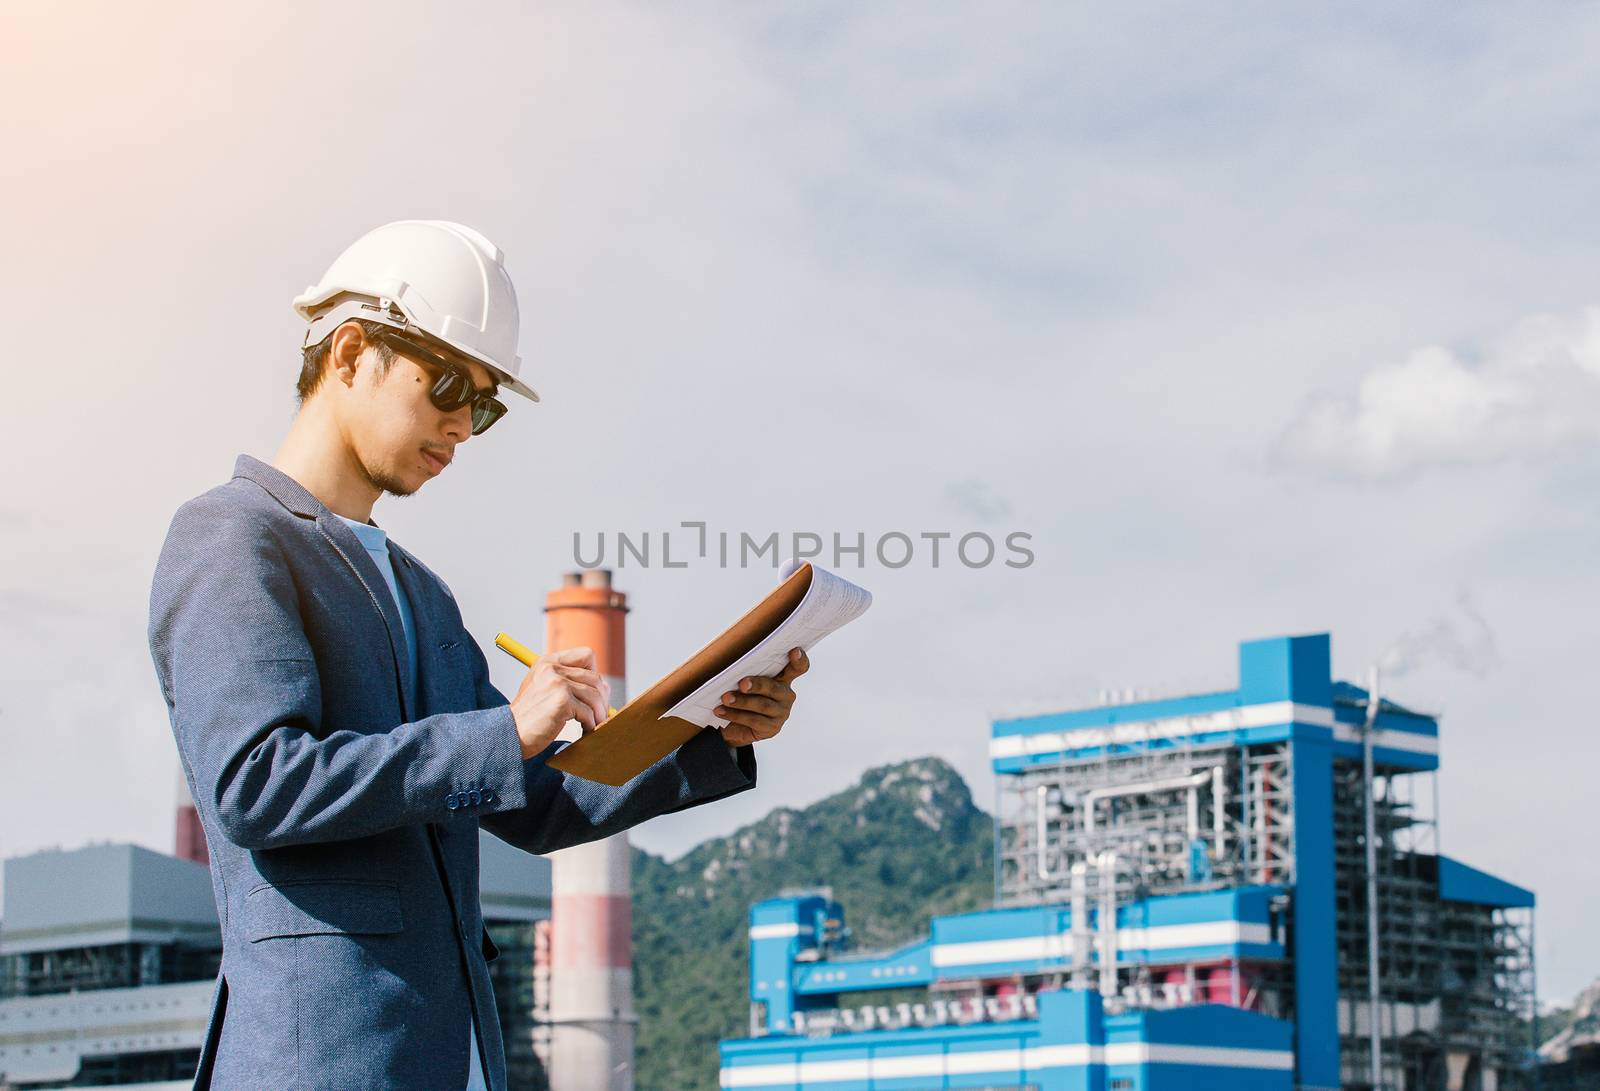 Engineer with a coal power plant in the background, Thailand by freedomnaruk